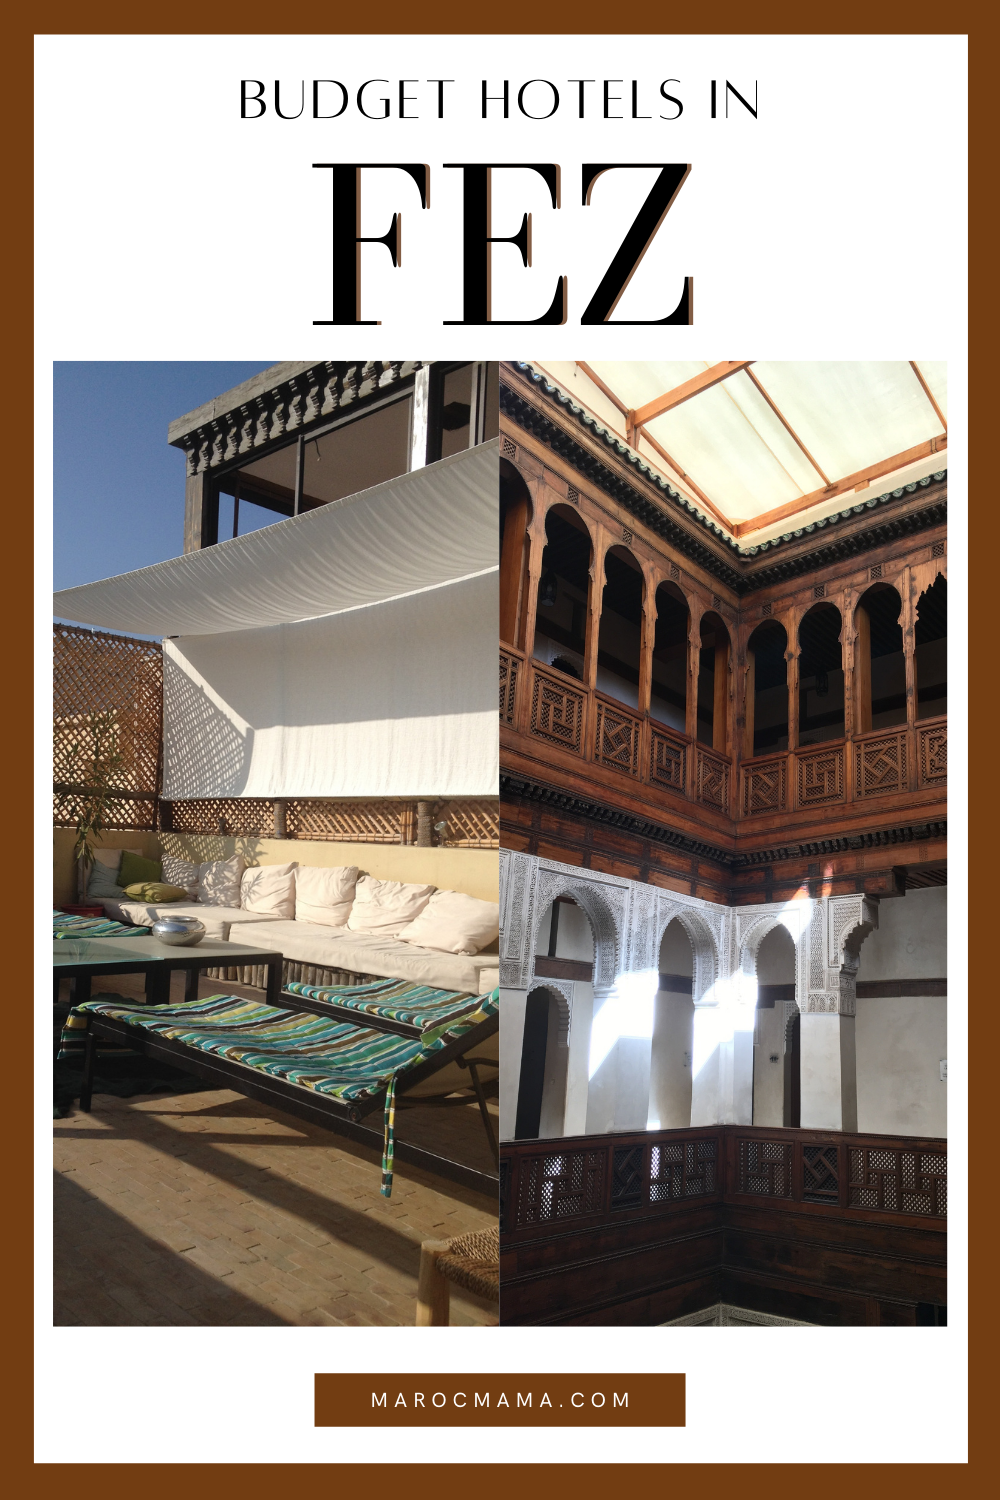 4 Images of Fez in a Collage showing the different styles of buildings